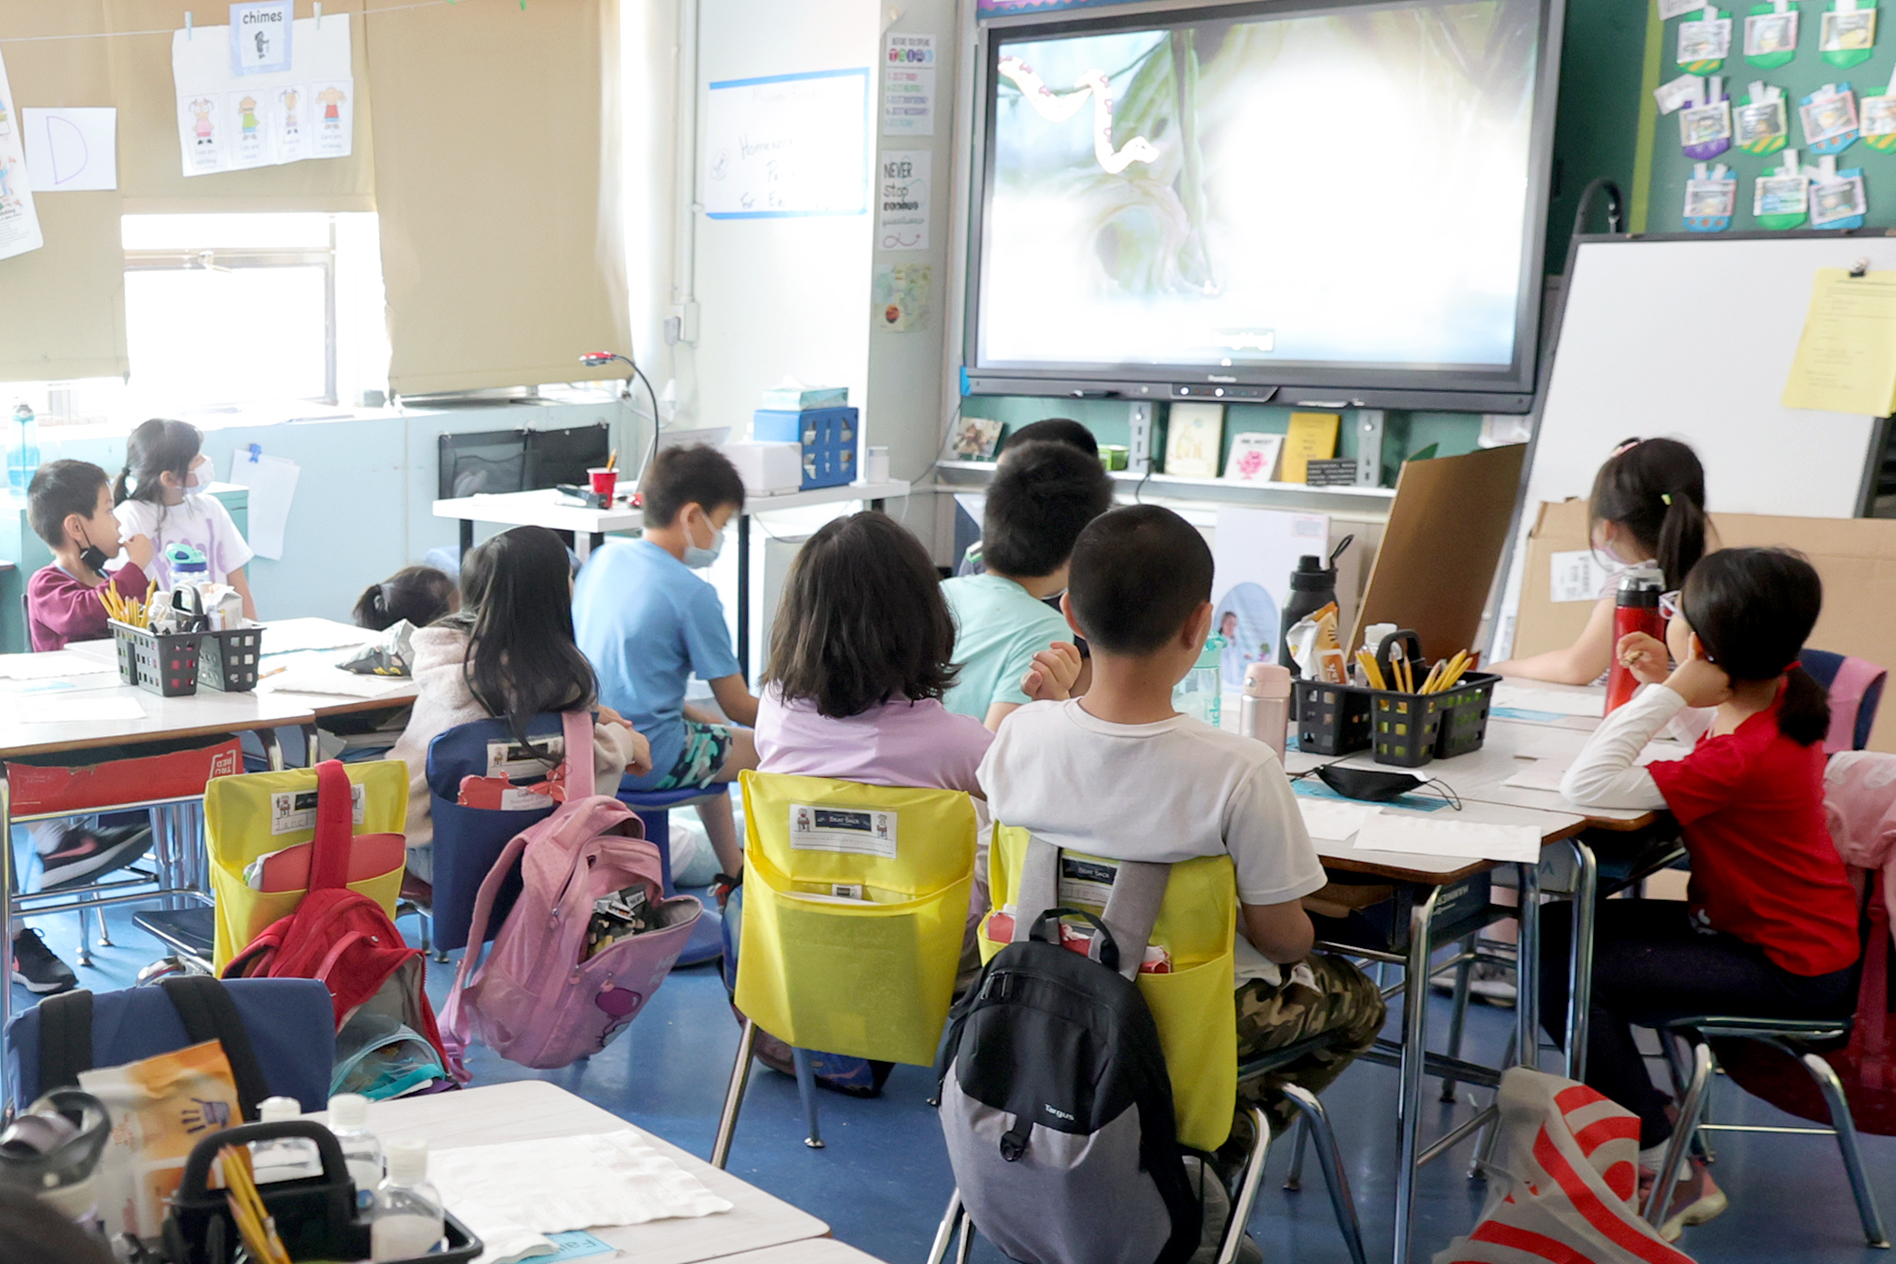 Students attend class on the second to last day of school as New York City public schools prepare to wrap up the year at Yung Wing School P.S. 124 on June 24, 2022 in New York City. Approximately 75% of NYC public schools enrolled fewer students for the 2021/2022 school year due to the pandemic. (Photo by Michael Loccisano/Getty Images)